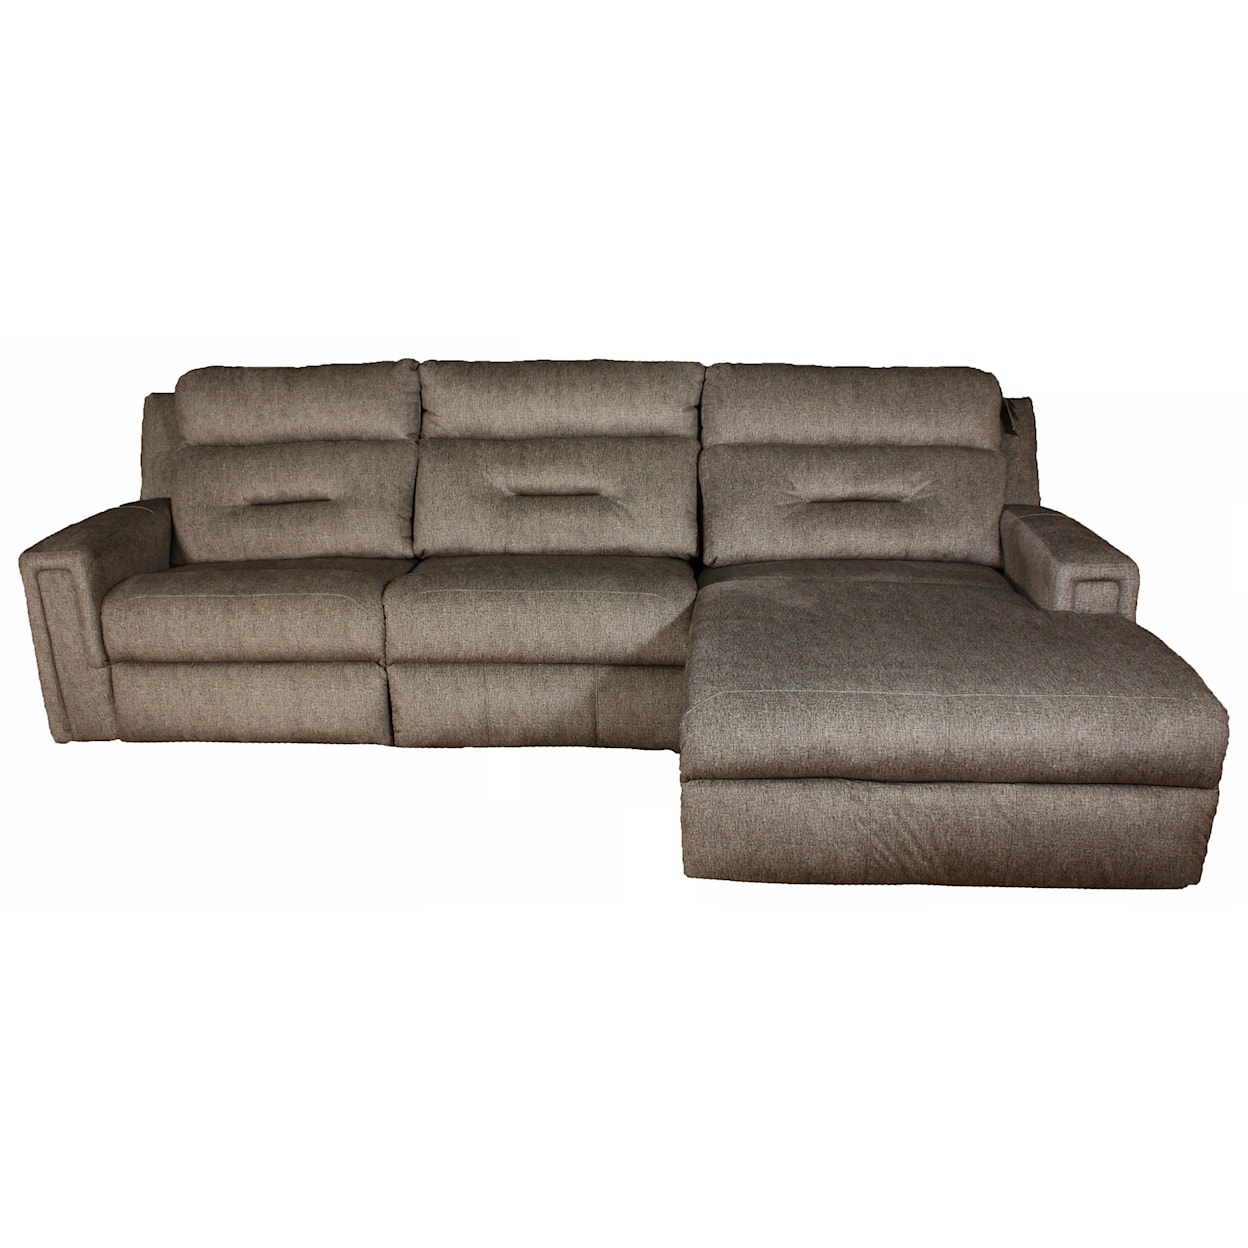 Southern Motion Excel 3 Piece Reclining Sectional